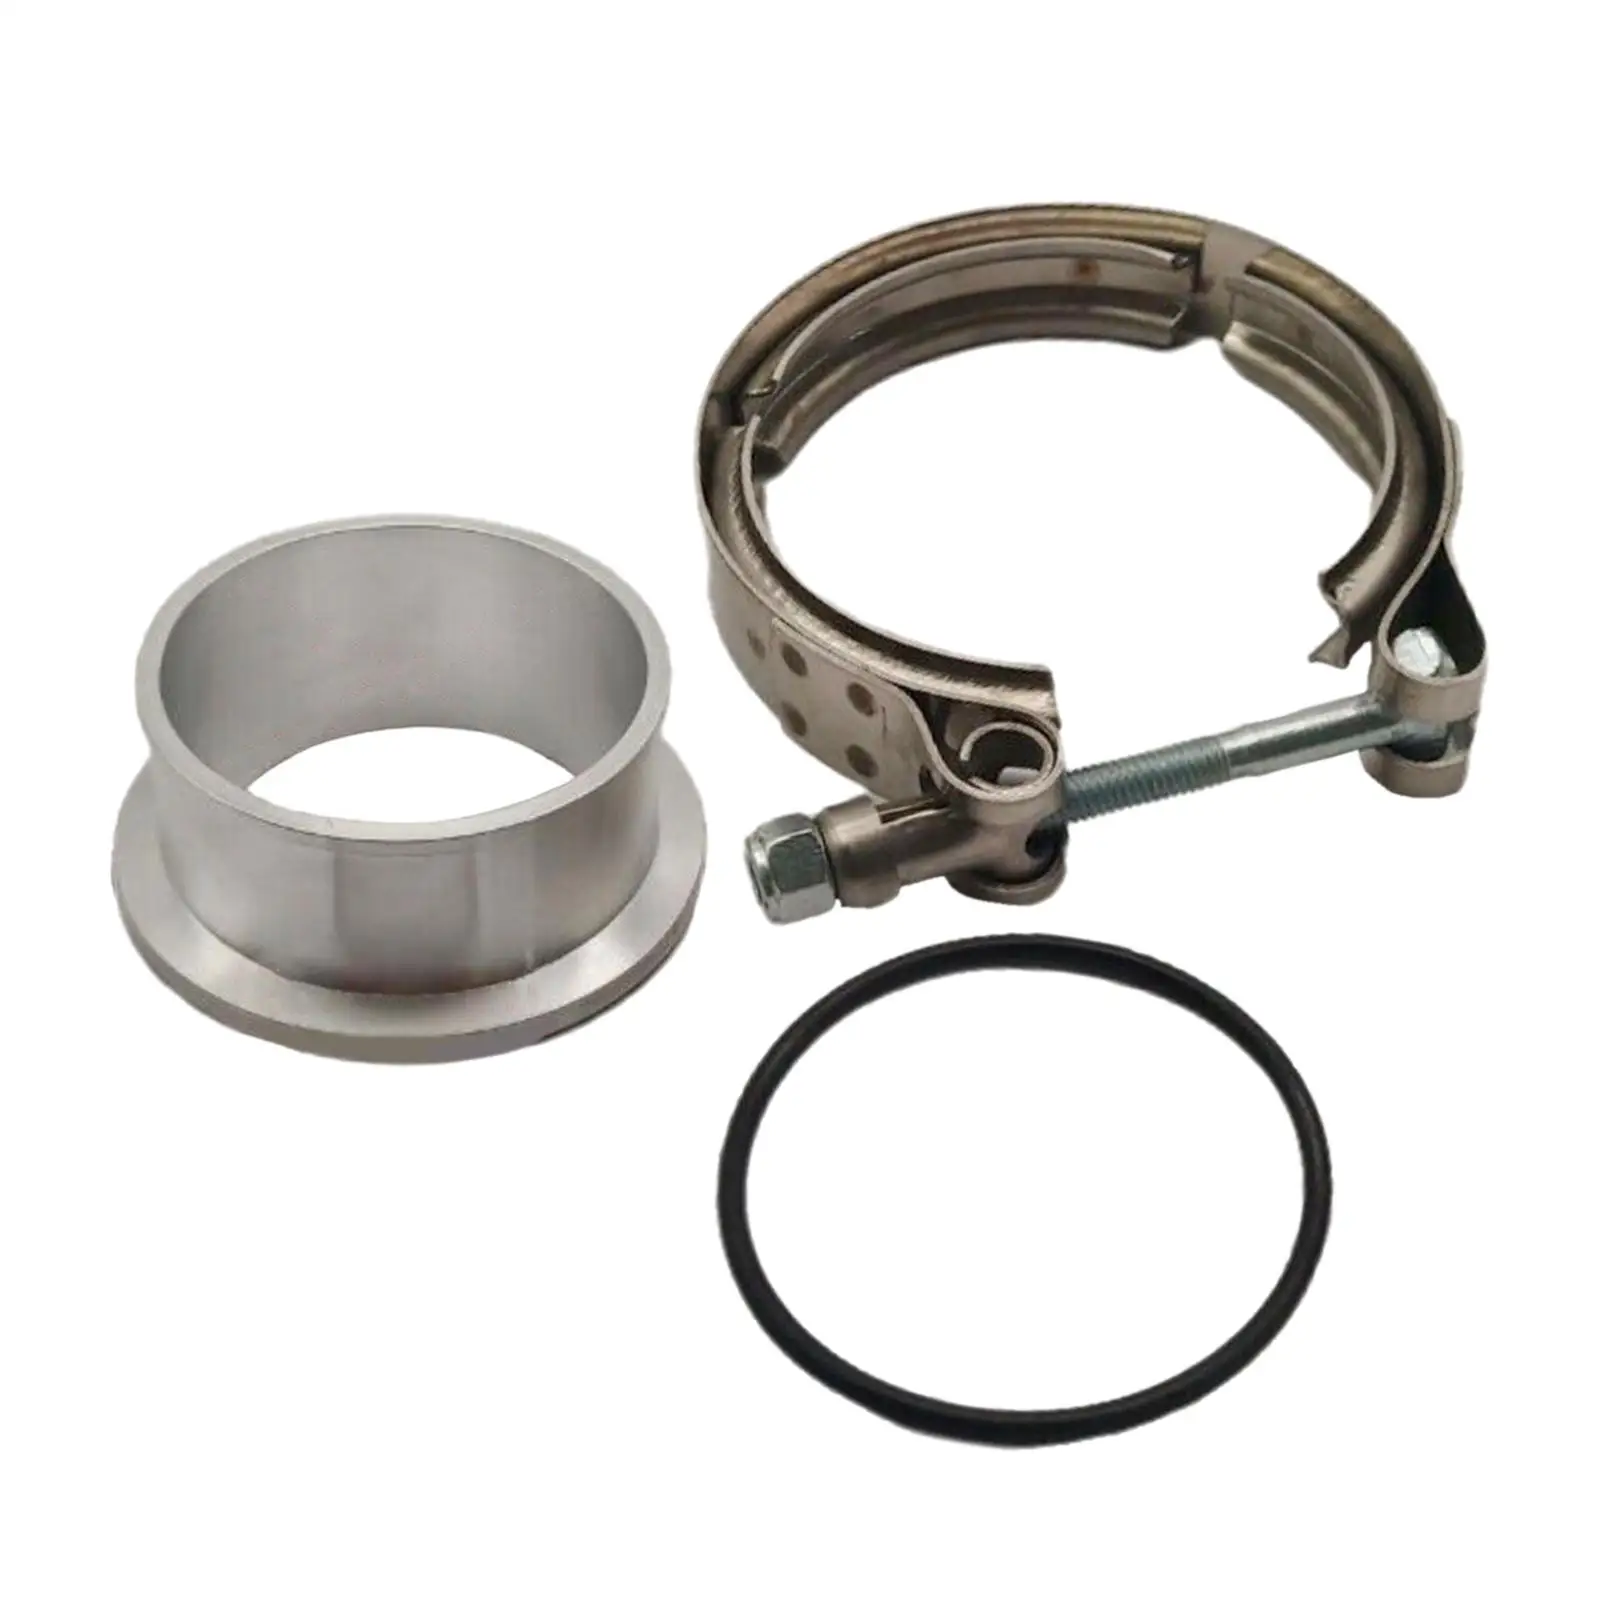 V Band Flange Clamp Excellent Quality Portable Turbo Air Transfer Pipe Clamp for